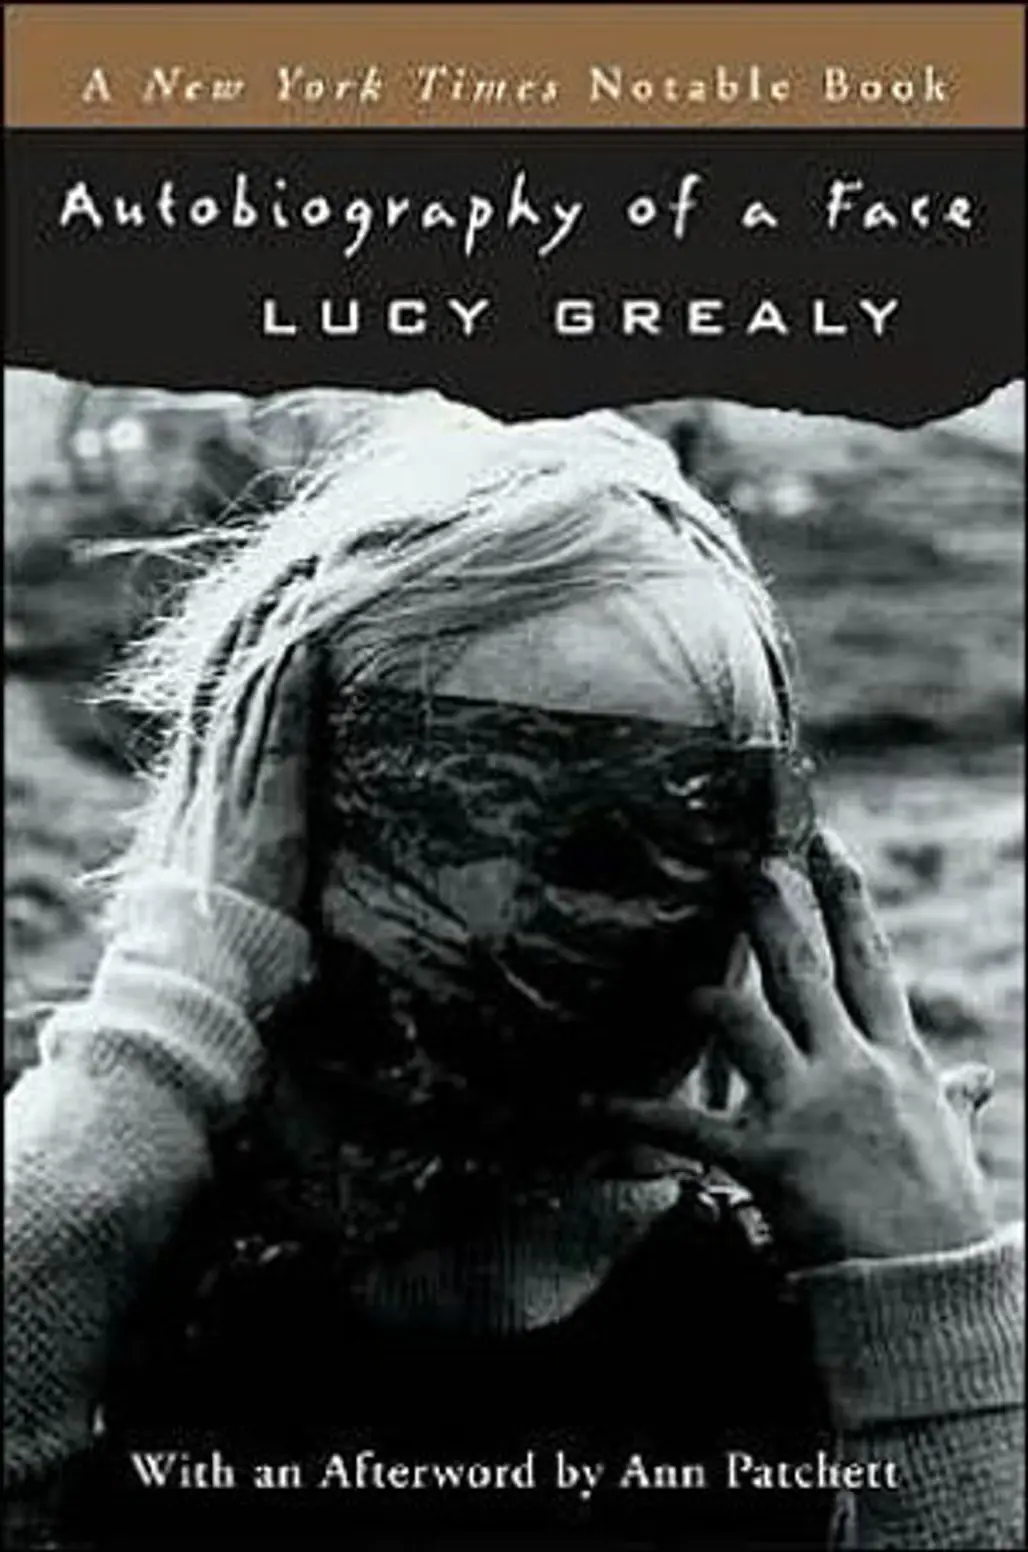 “Autobiography of a Face” by Lucy Grealy